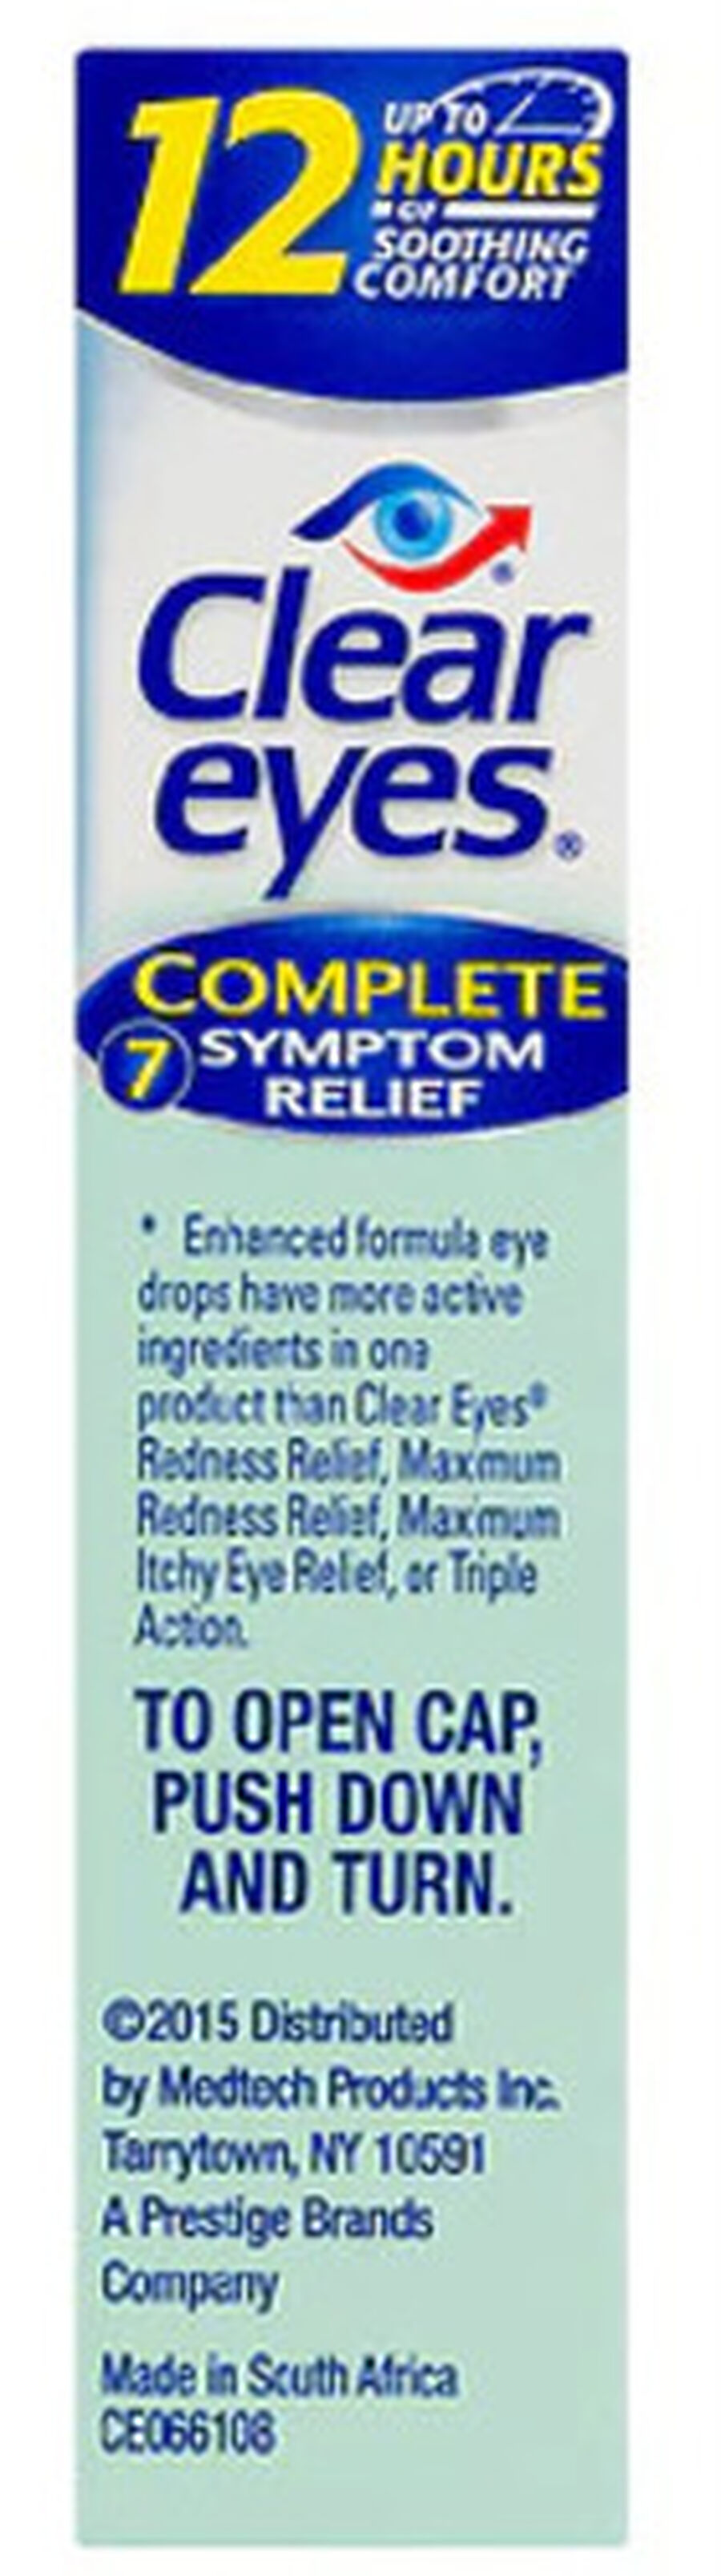 Clear Eyes Complete 7 Symptom Relief Drops, .5 oz., , large image number 2